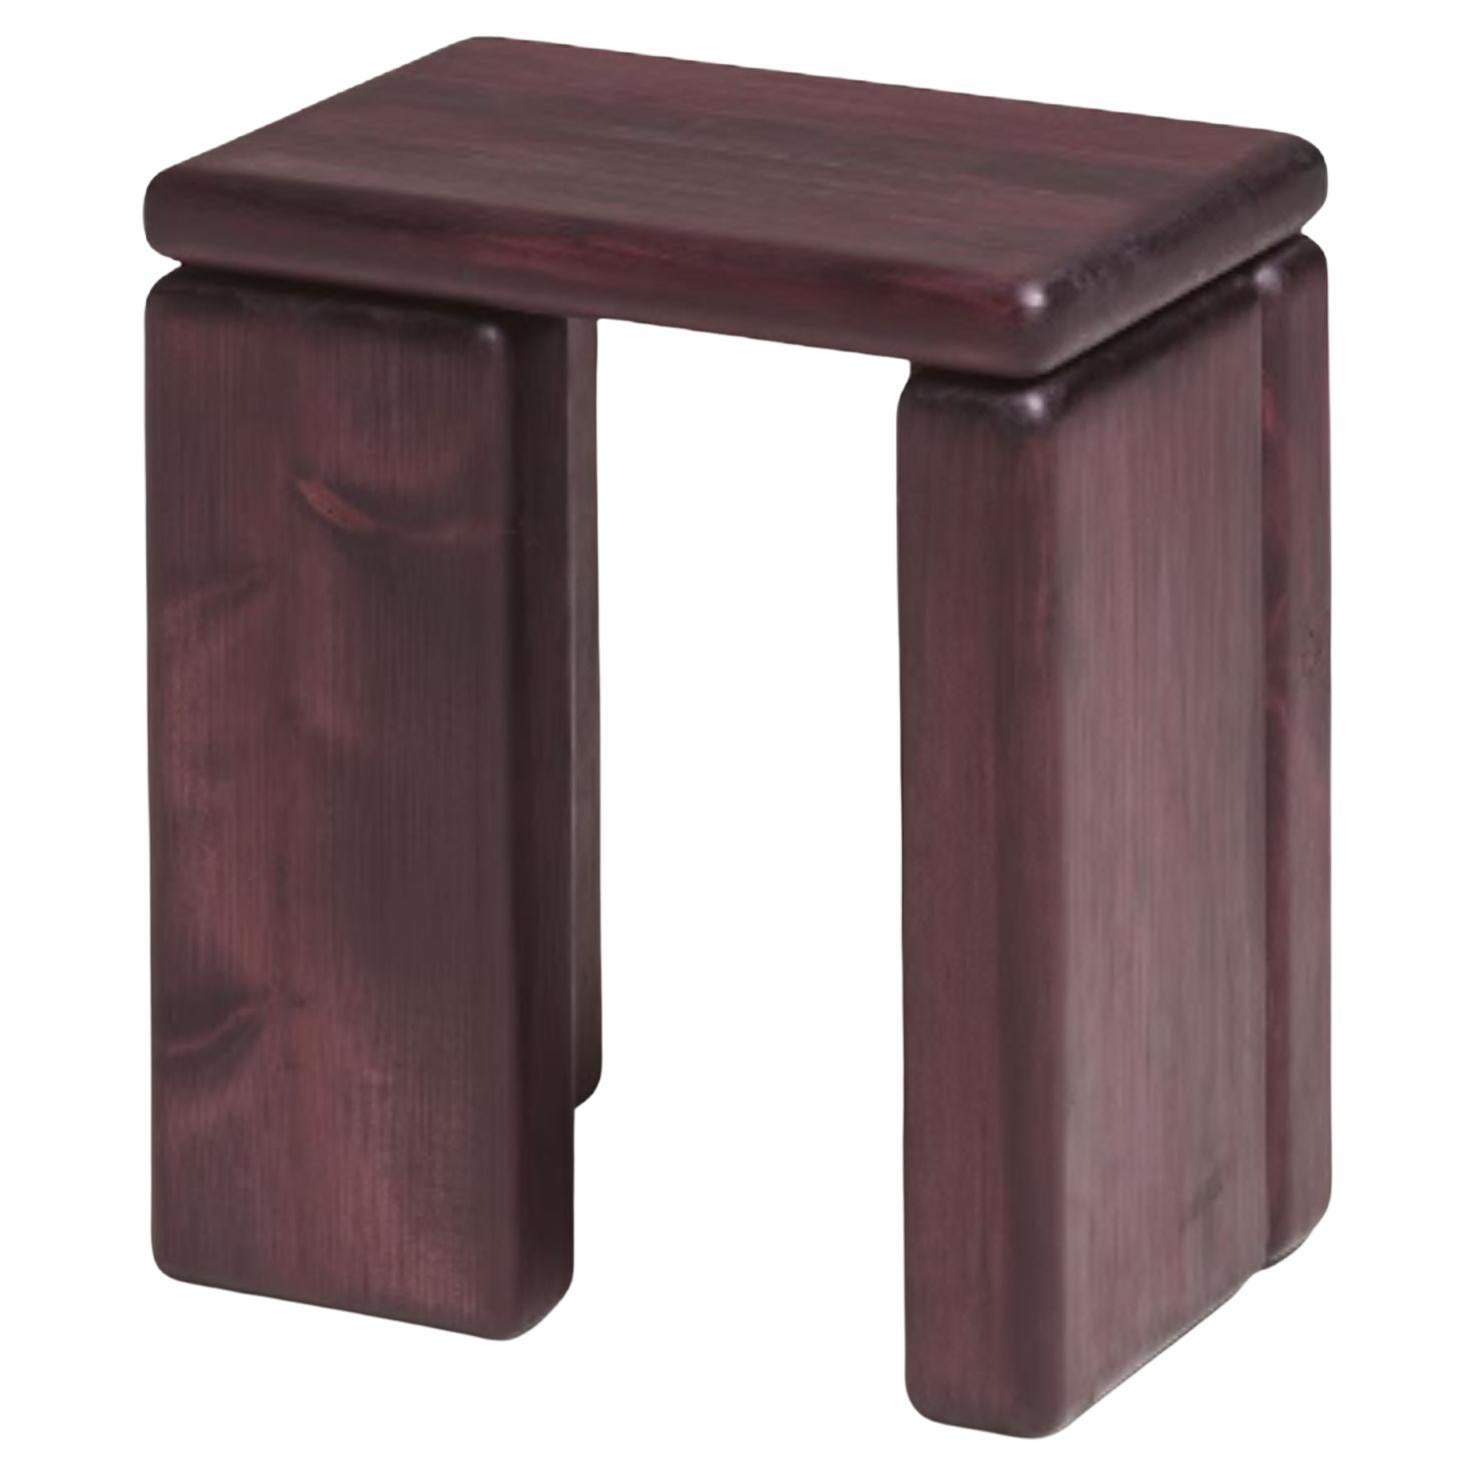 Timber Stool Purple-Red by Onno Adriaanse